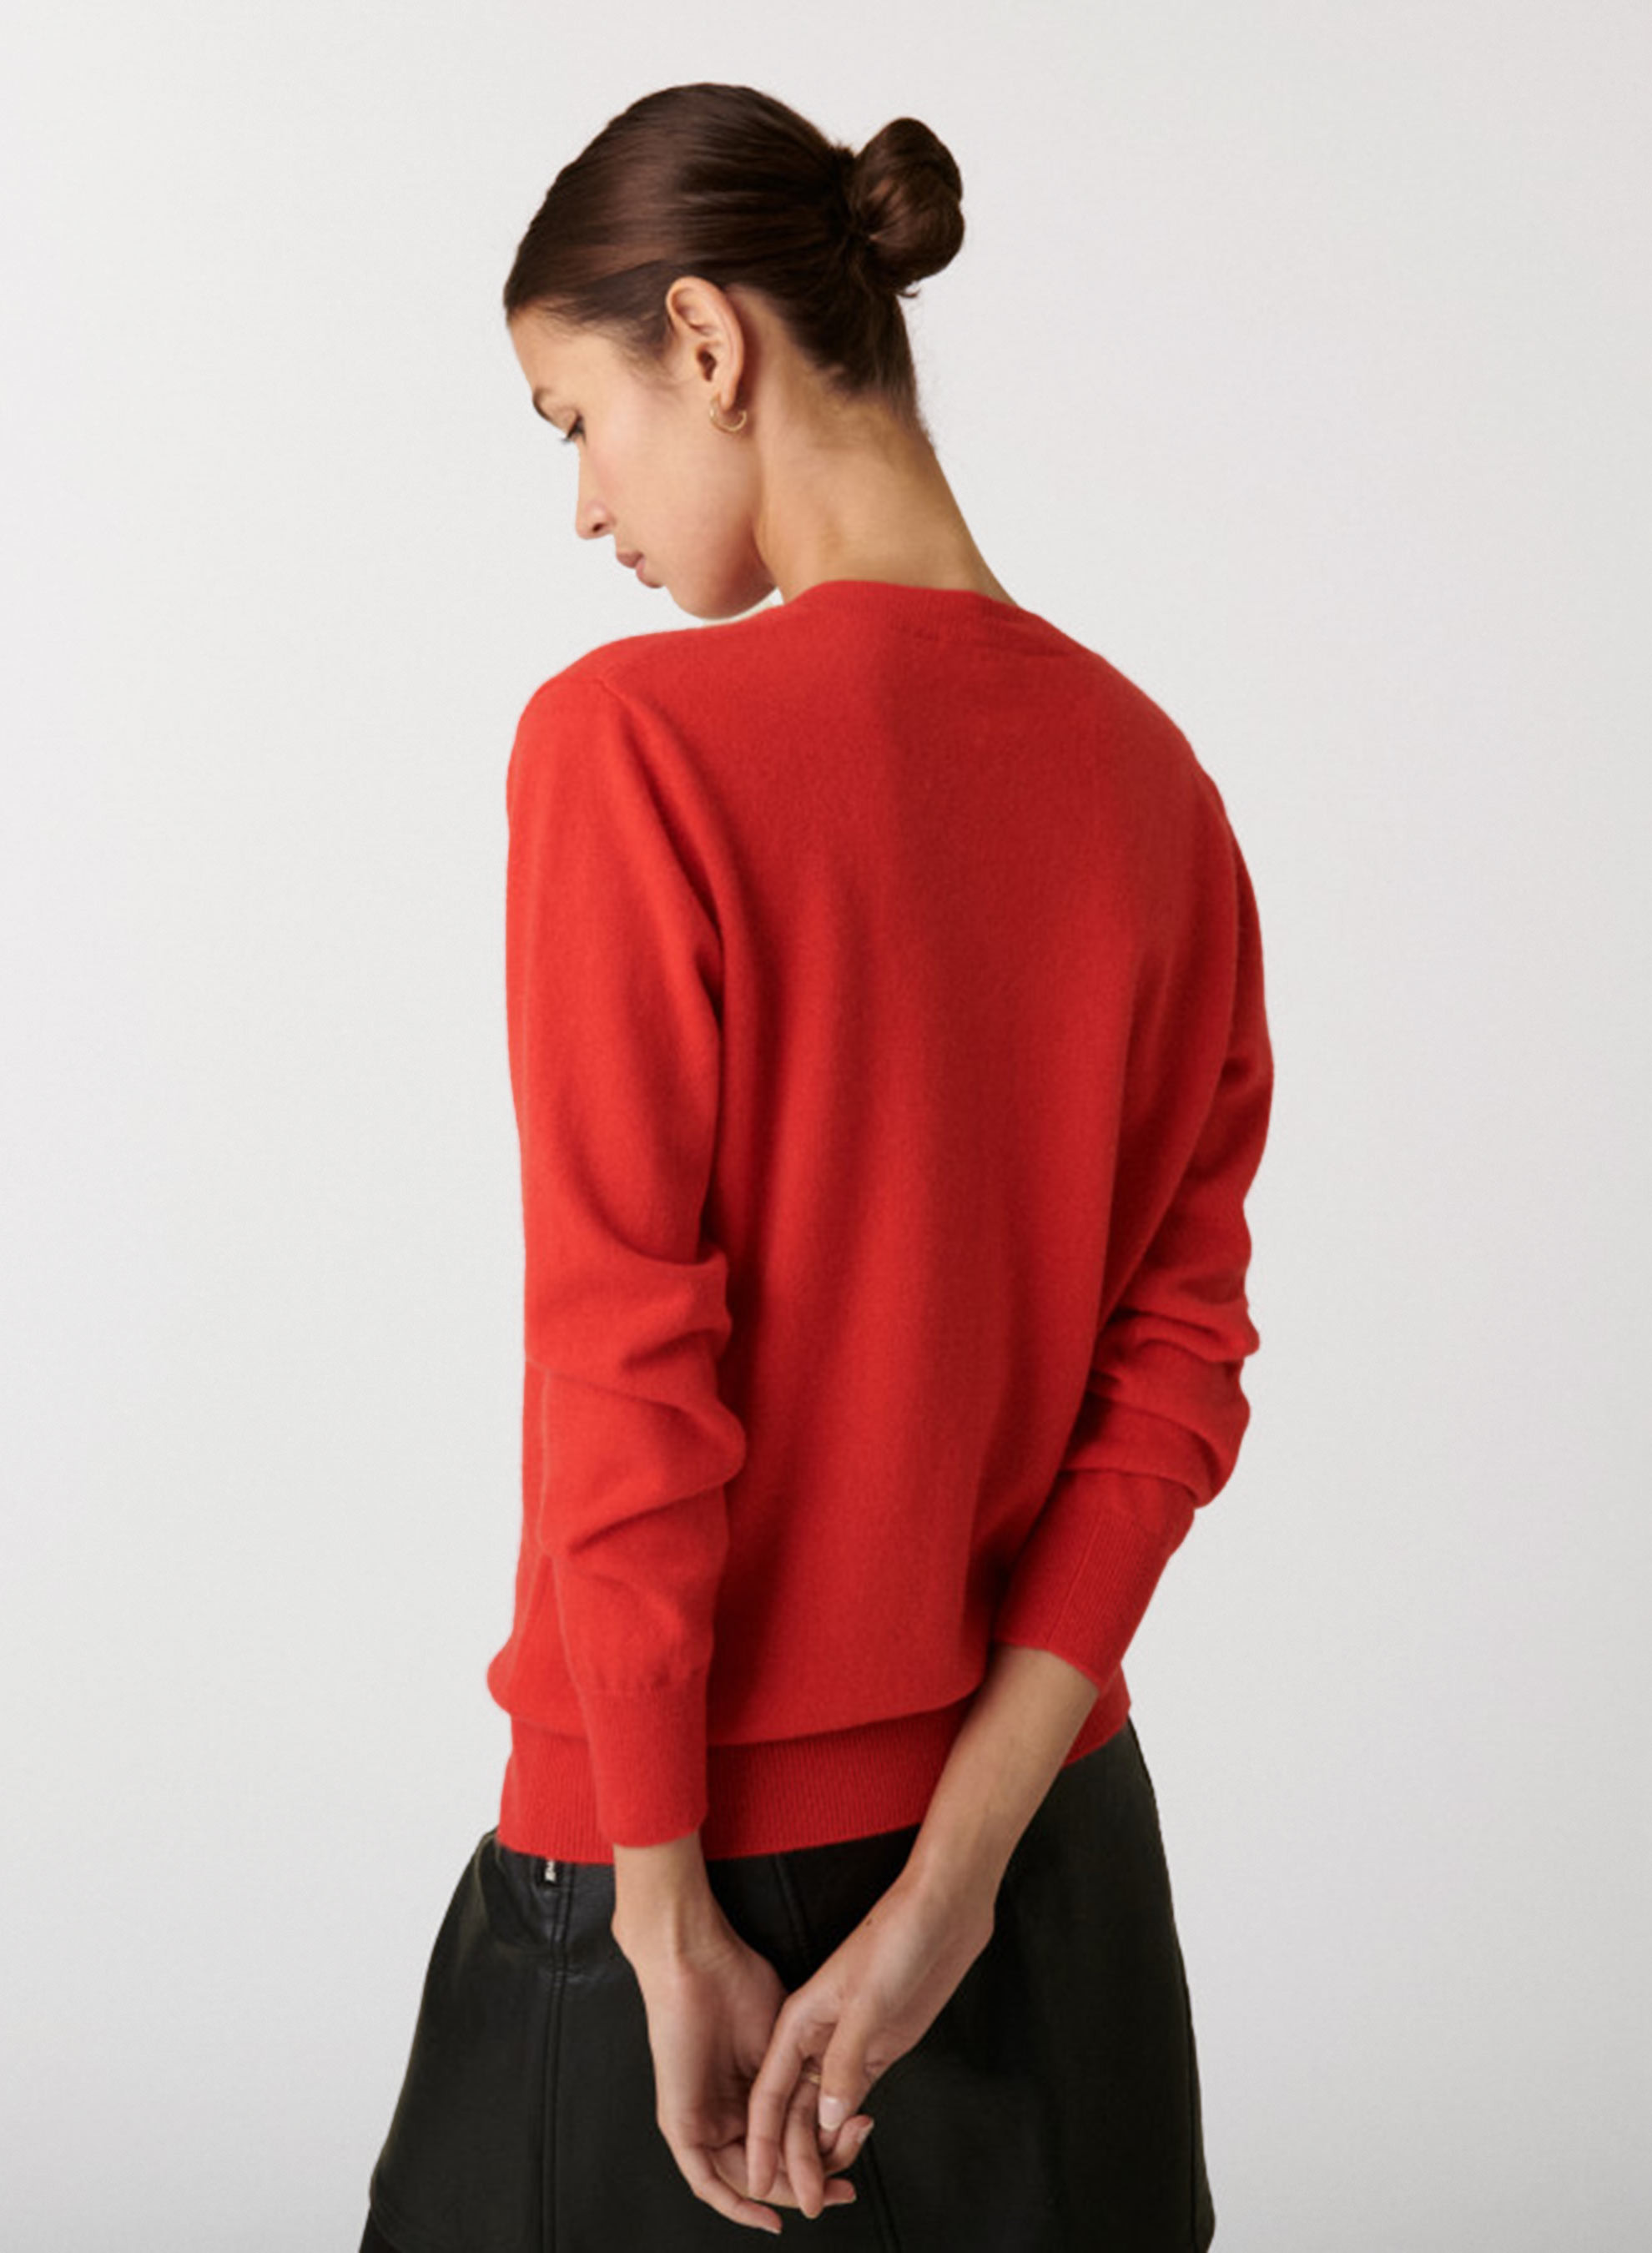 Luxe femmes Cashmere Knitwear Pull Col Roulé Pullover Loose Sweater Tops